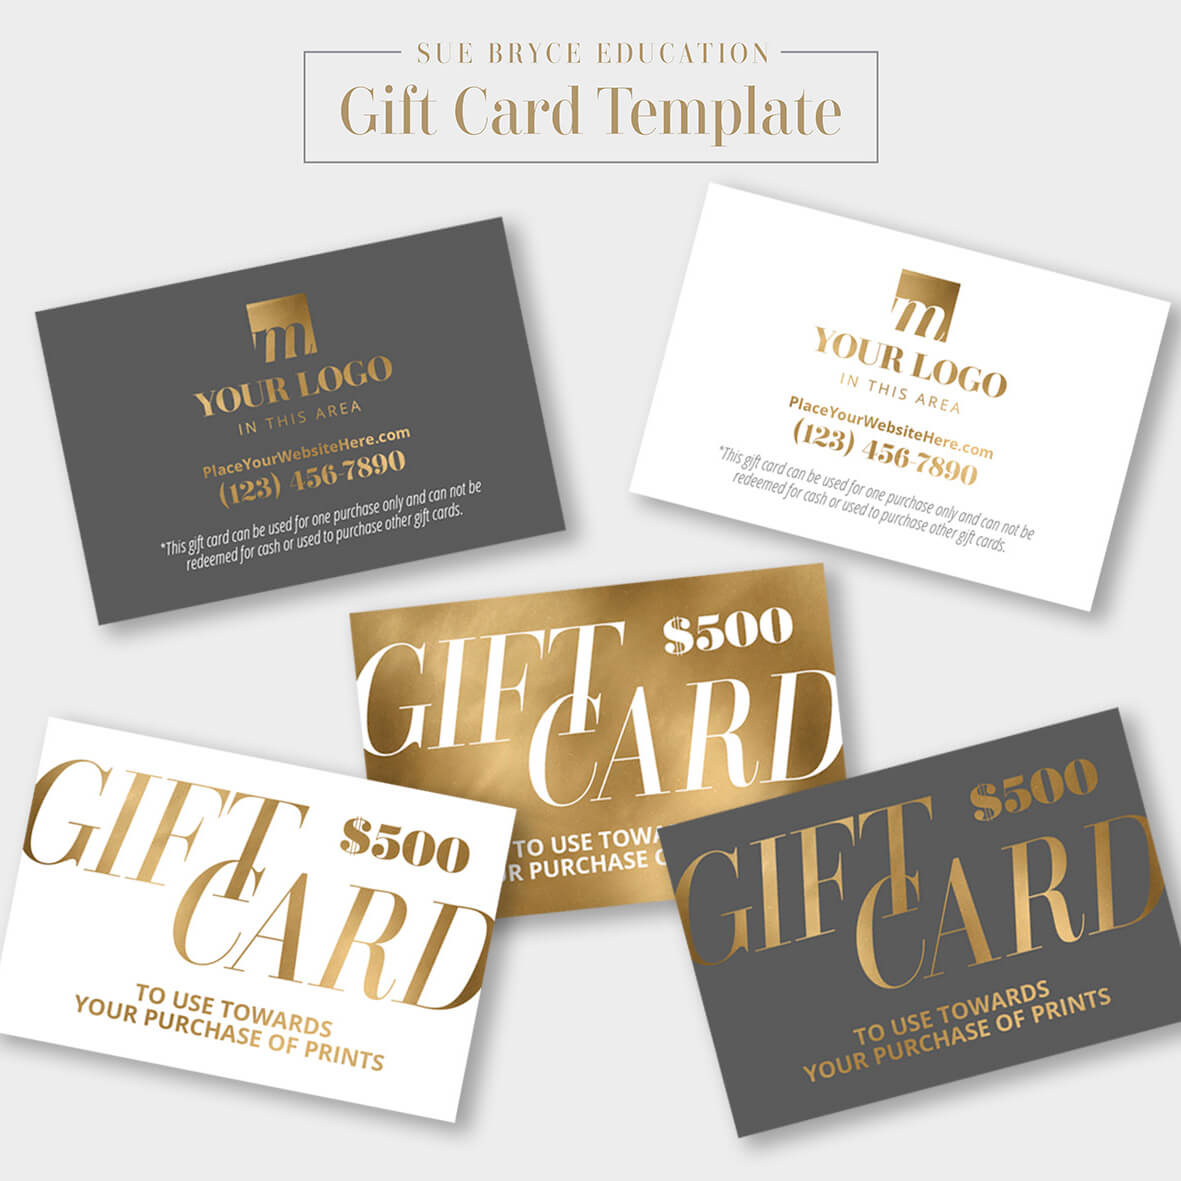 Gift Certificate Templates Indesign Illustrator Gift Coupon In Gift Certificate Template Indesign